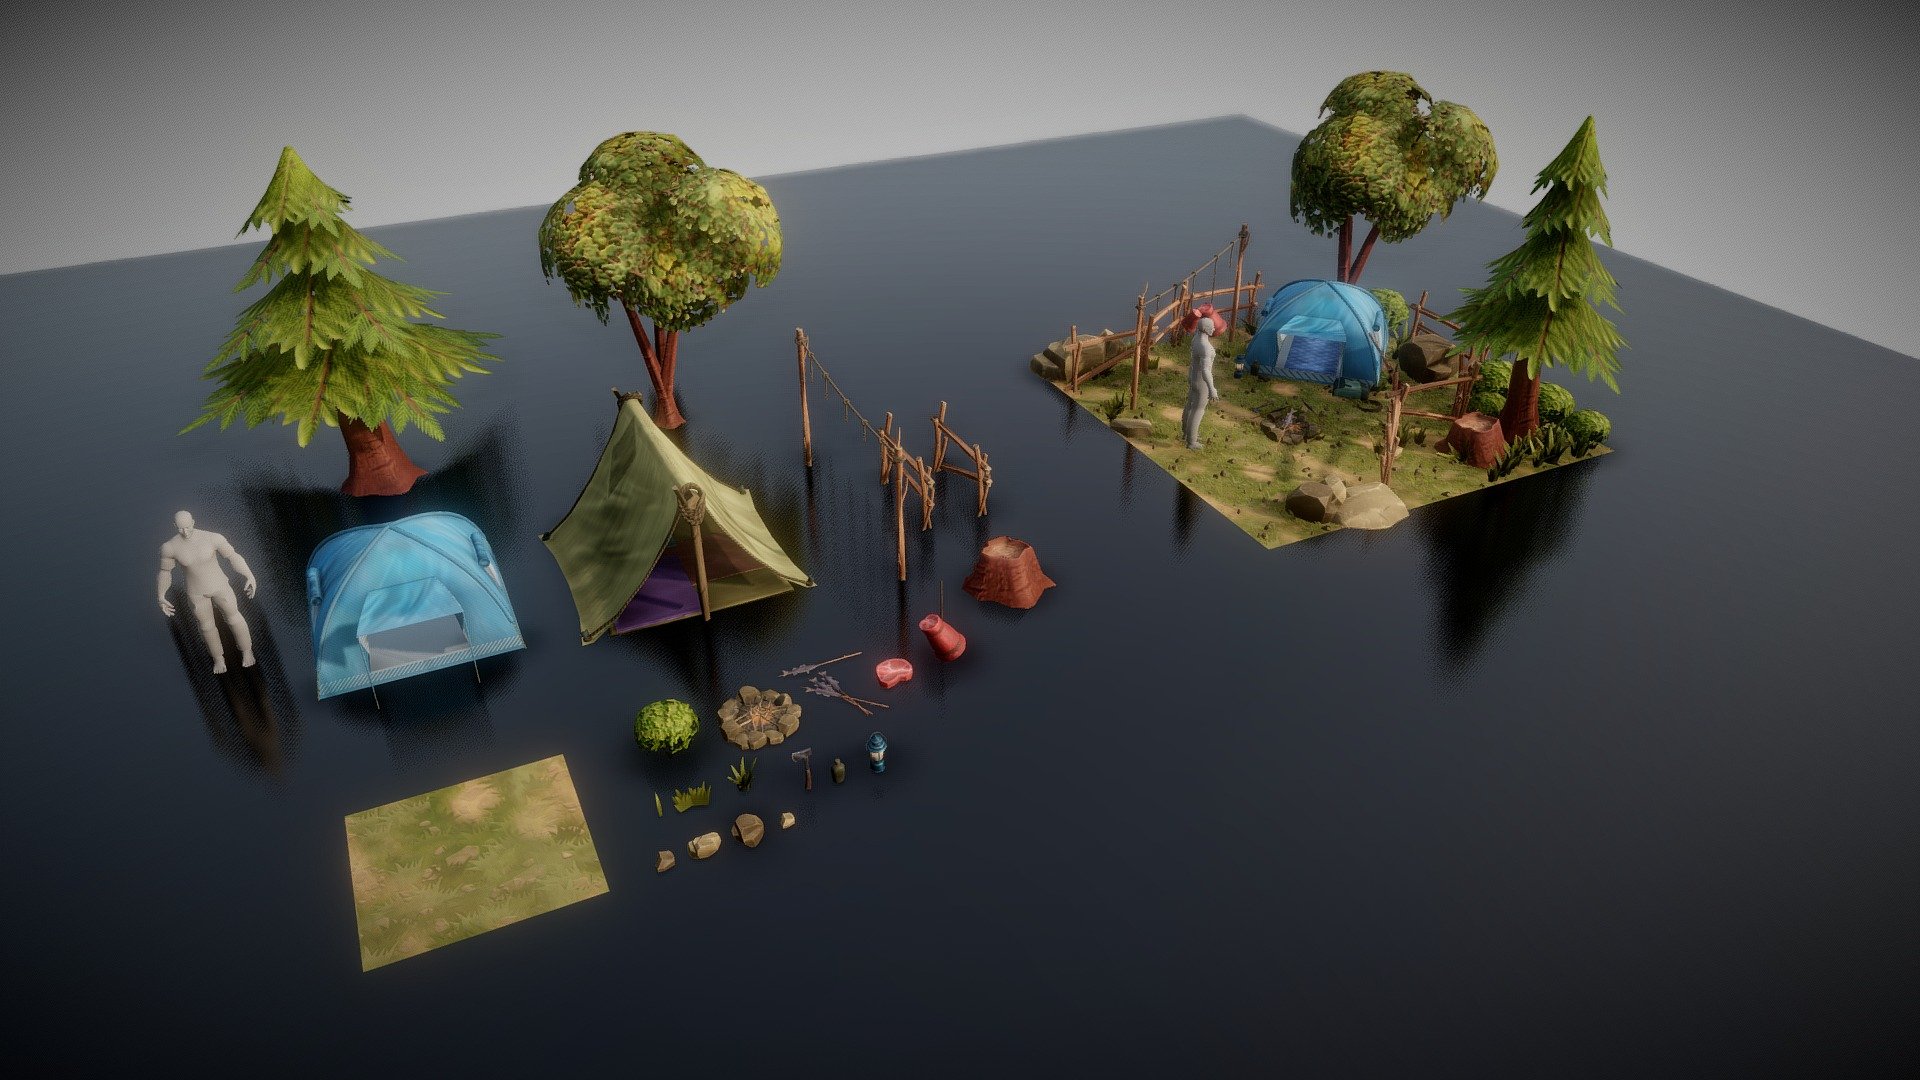 Alone at the other area. Trying to survive, setting a temporary camp and using recources nearby.
This asset is best for a top-down game. It's already optimized to fits into your scene. So you can also apply this asset to variety of games.
This Package contains :




20633 objects (Including the sample scene and particle system)

42486 vertices

84449 edges

42216 polygons

82094 tris

For further business or information about 3D Assets, You can contact me on my Instagram. I put the link in my bio. You can also write your comment on my asset post.
Thank you for visiting 3d model